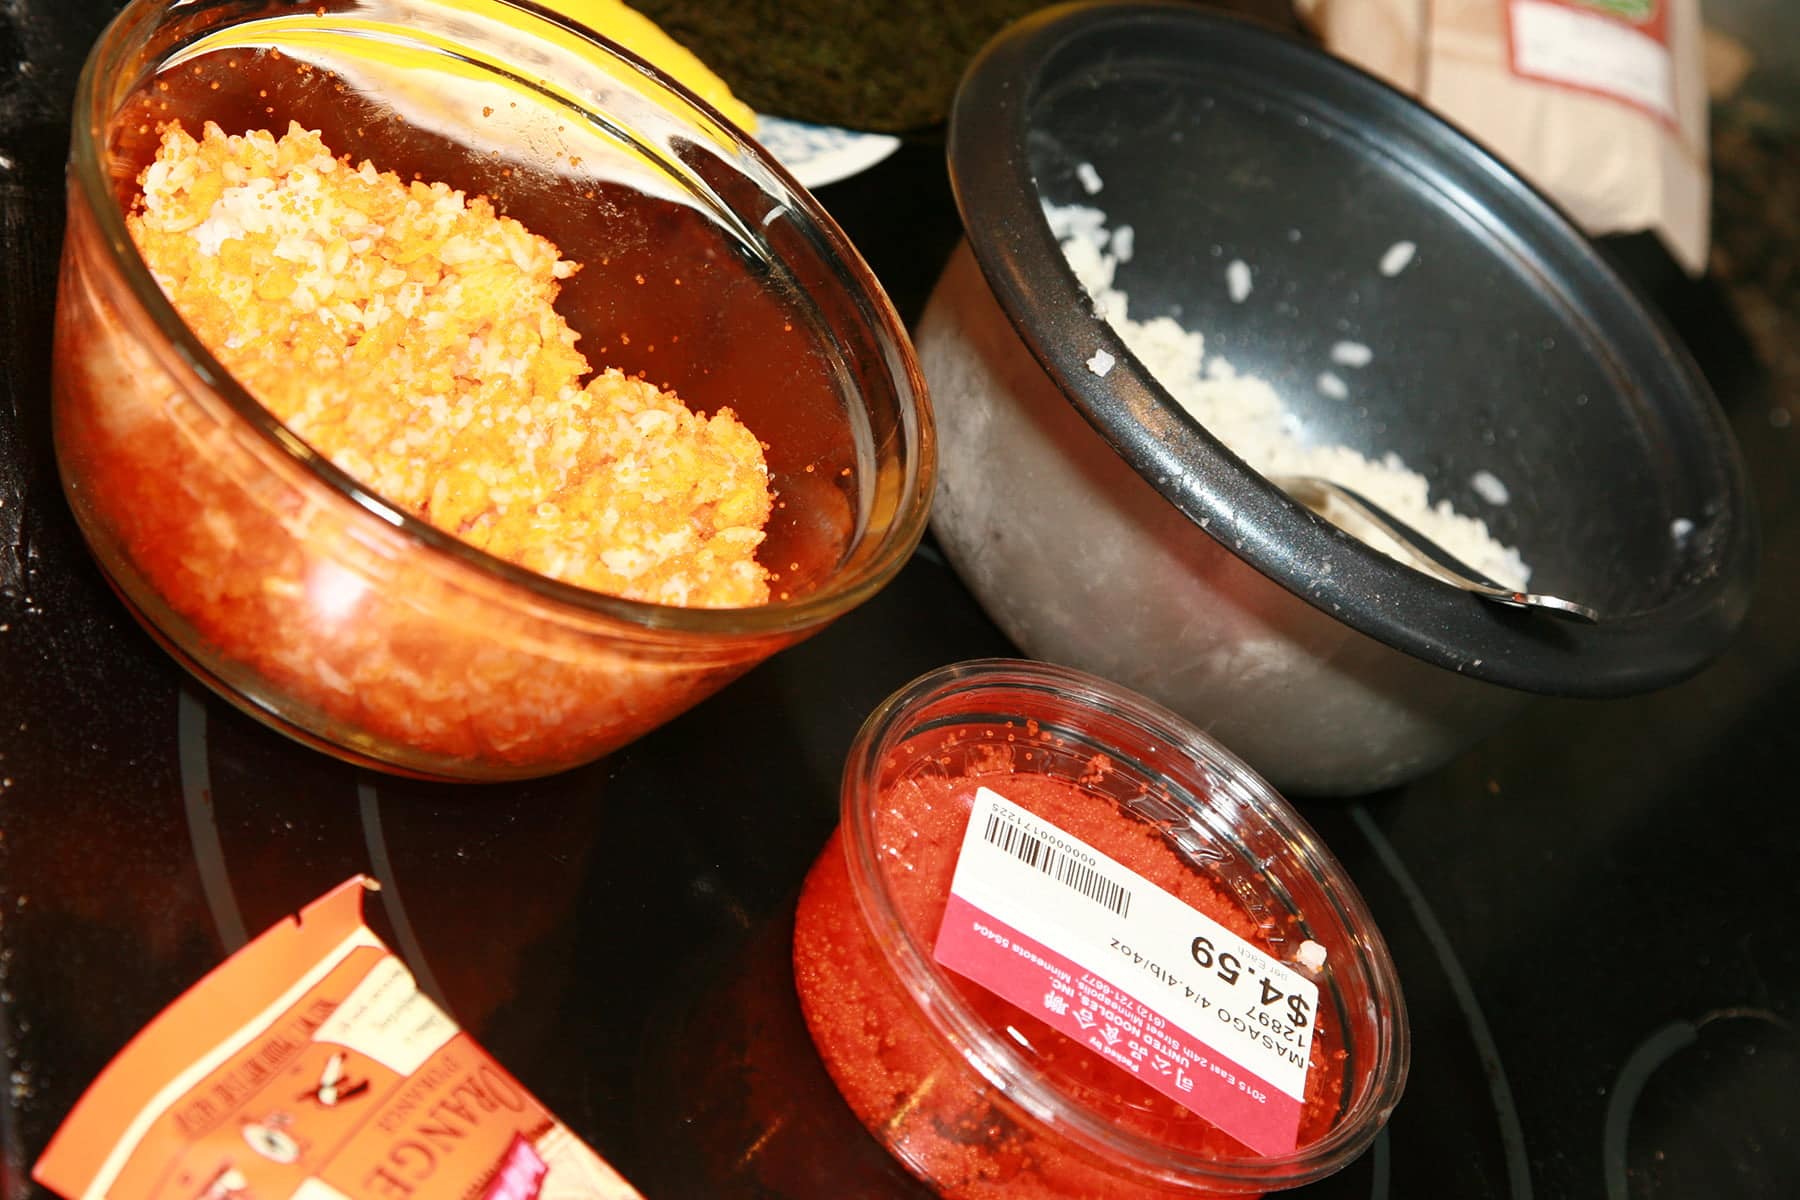 A bowl of orange rice, a rice maker with white rice in it, and a small tub of masago.